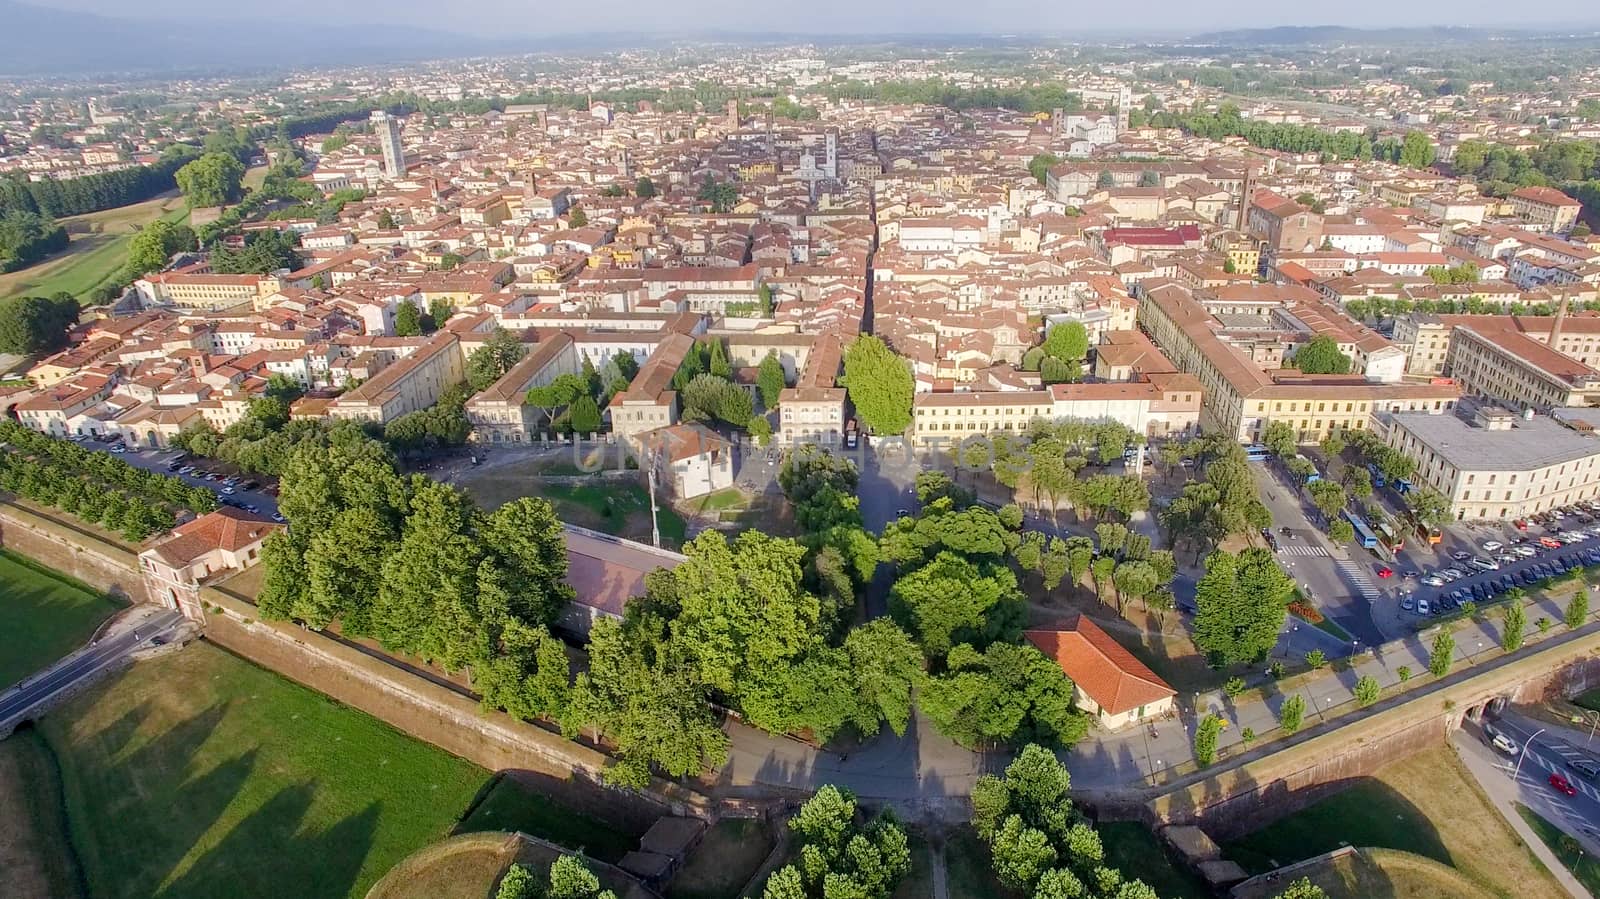 Lucca, Tuscany - Italy. Aerial view of old city and ancient walls